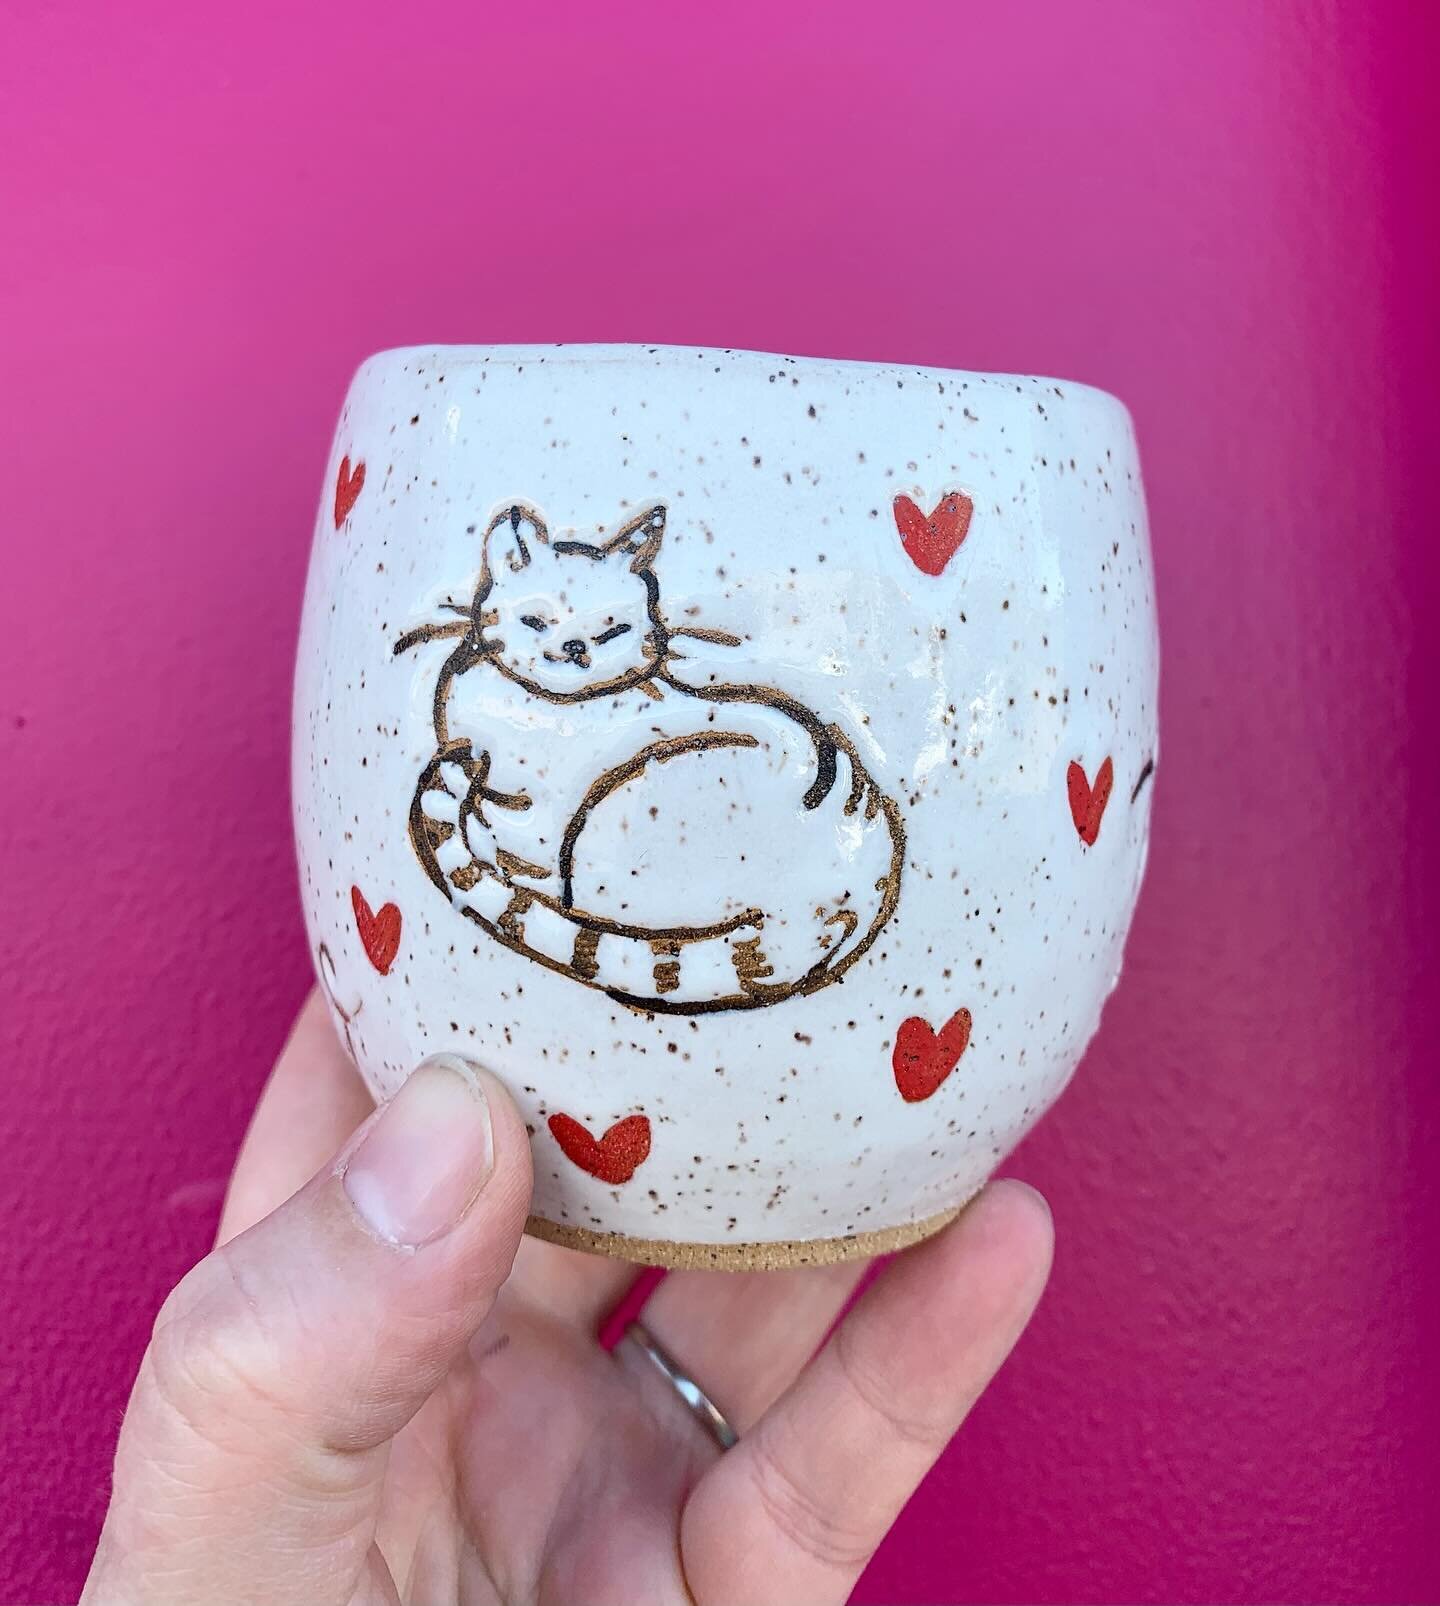 TACOMA! i&rsquo;m coming to you for my first event outside of oregon! i&rsquo;ll be at @pnwpopuppro.market at @ebonyandivorycoffee this saturday! can&rsquo;t wait to spend a little time in this cute city. hope to see you there!

#ceramics #tacomawash